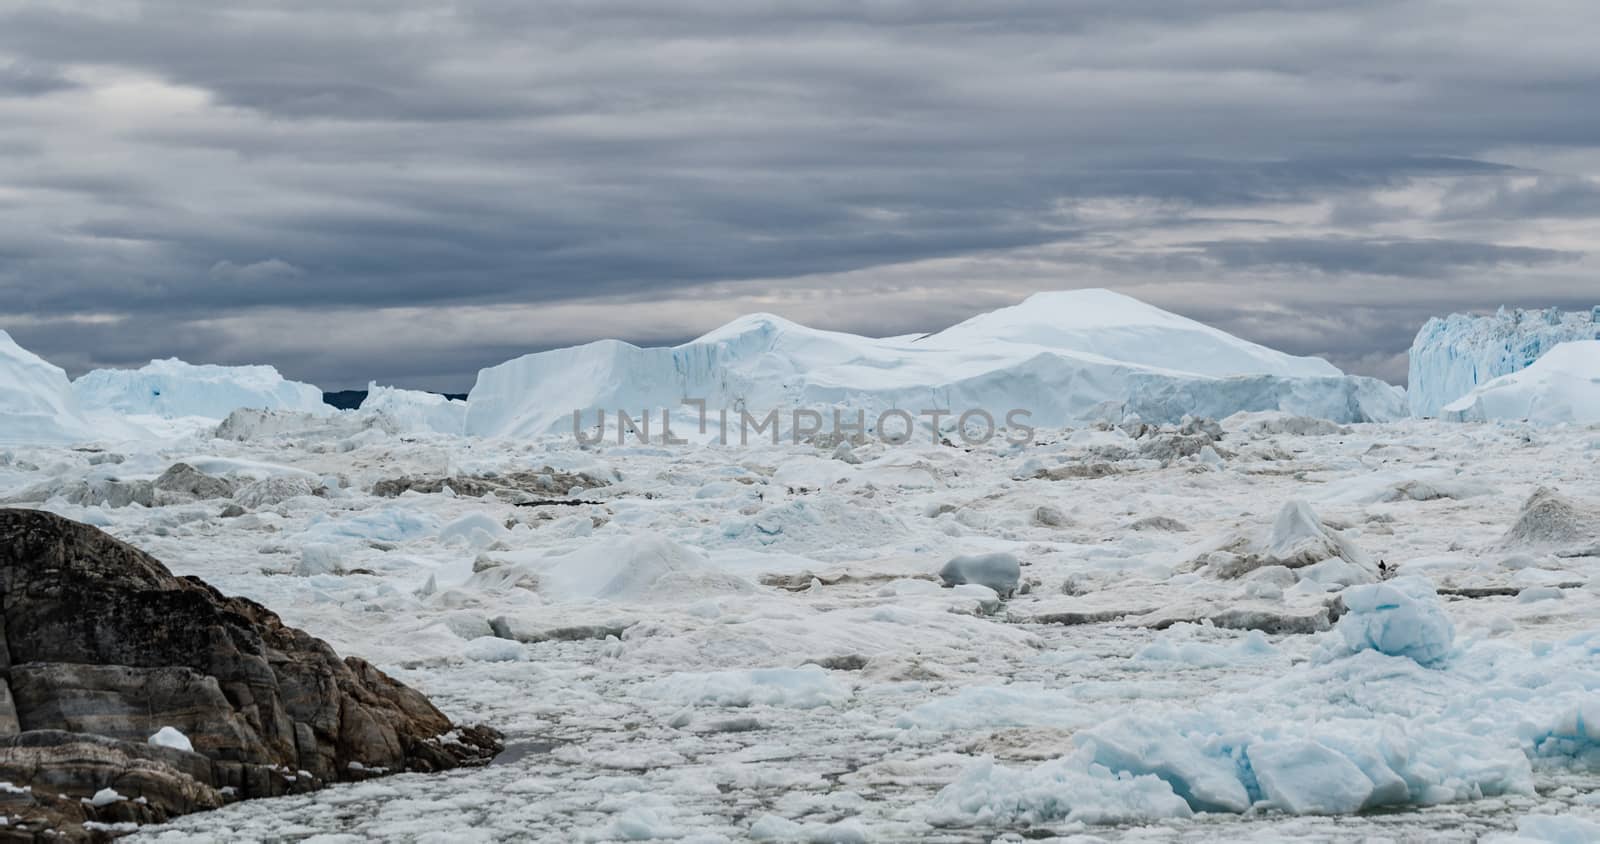 Icebergs from melting glacier in icefjord - Global Warming and Climate Change Icefjord in Ilulissat, Greenland. Aerial drone photo of arctic nature ice landscape. Unesco World Heritage Site.